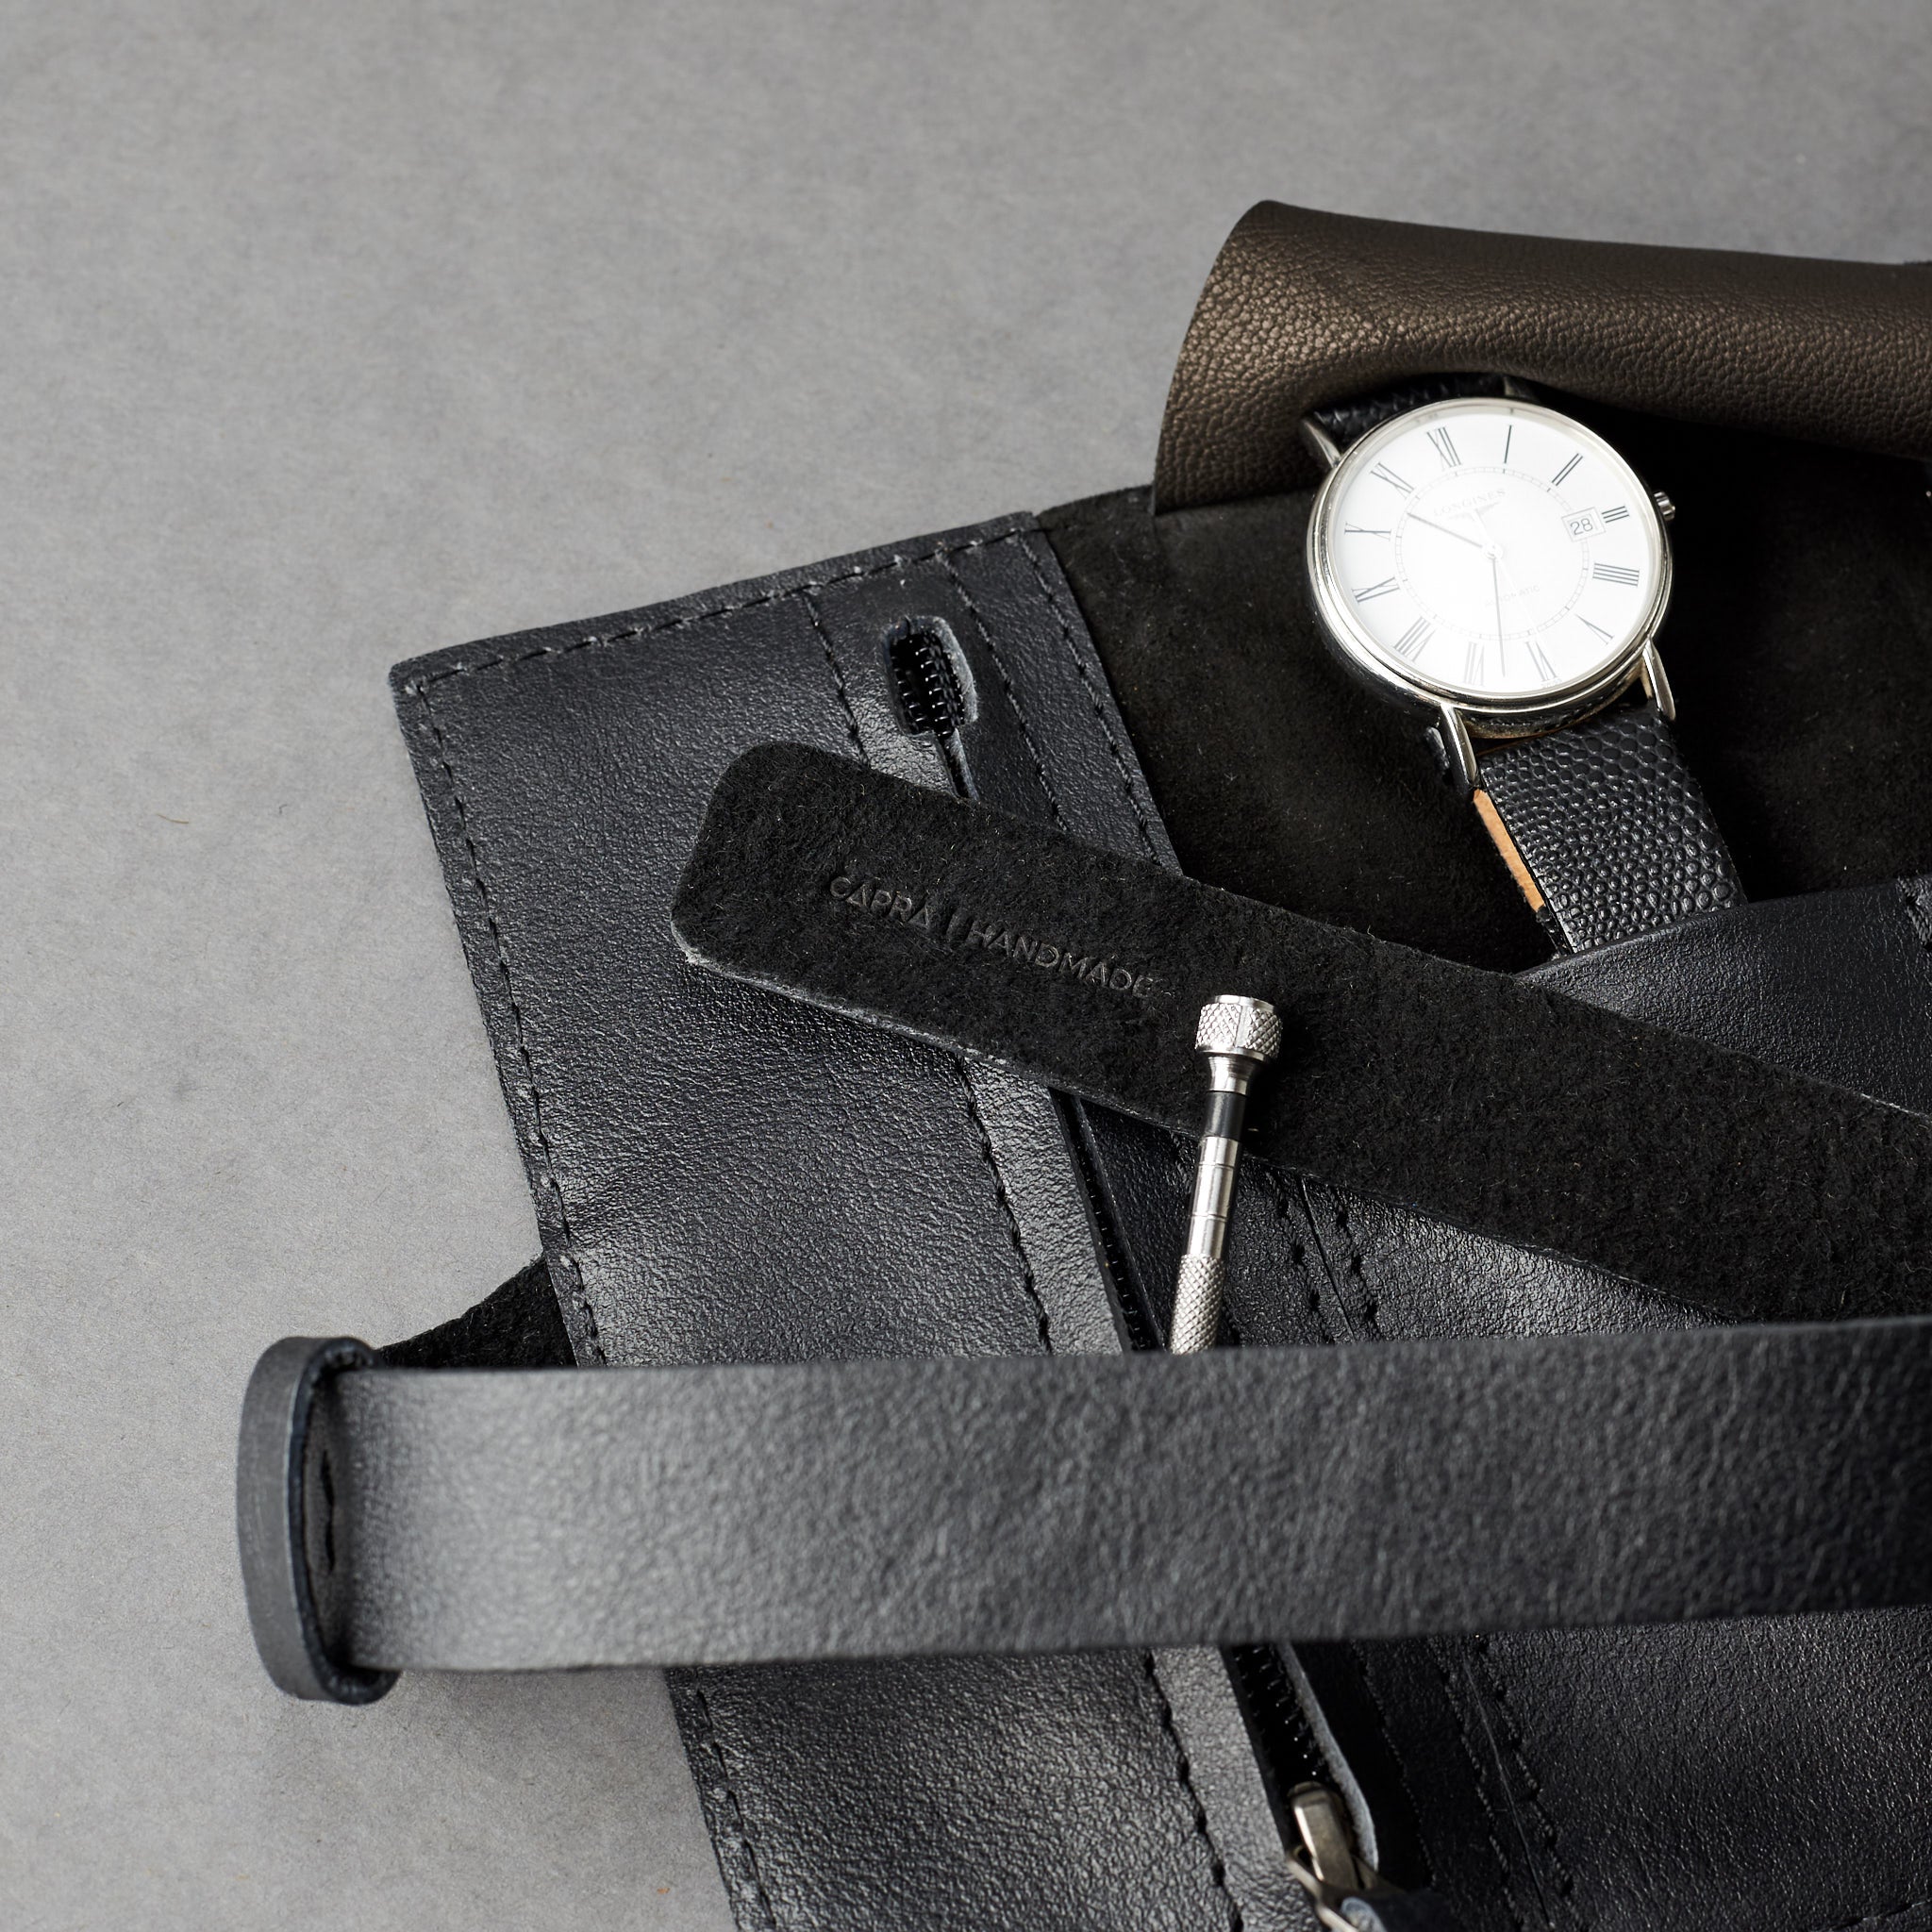 Leather Travel Watch Cases & Watch Rolls by Capra - Capra Leather